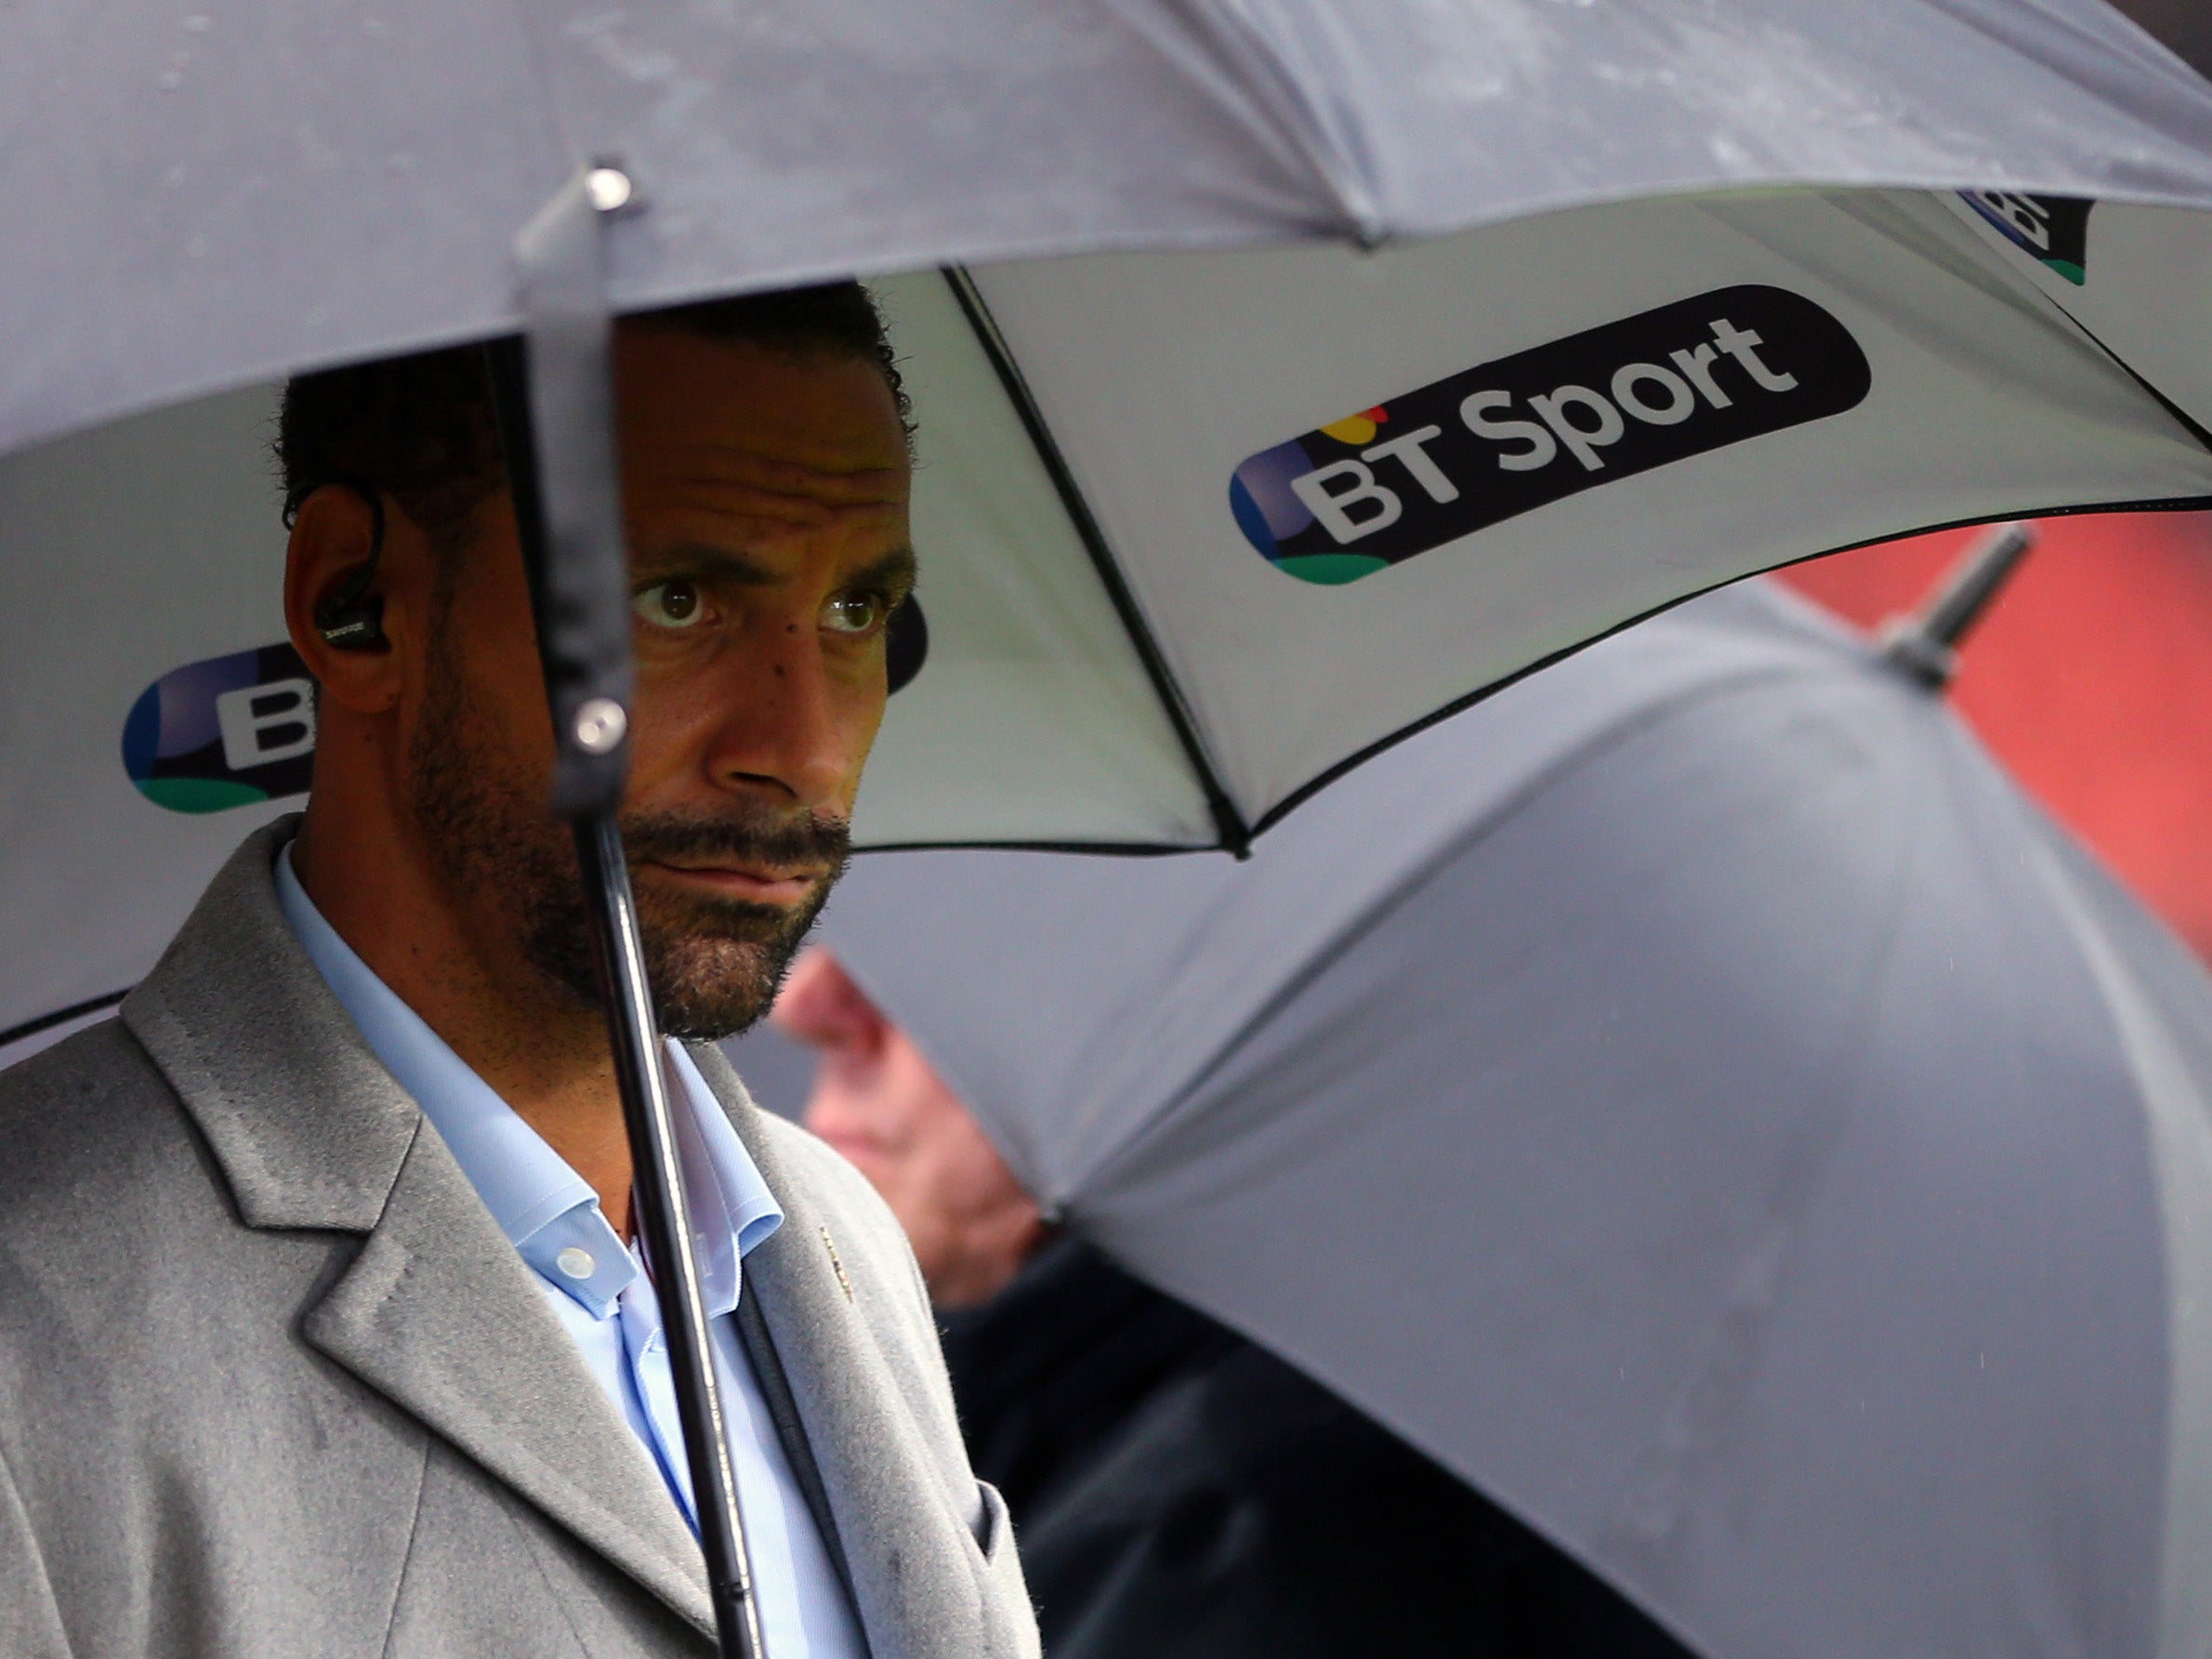 Former Leeds United and Manchester United defender Rio Ferdinand on duty for BT Sport